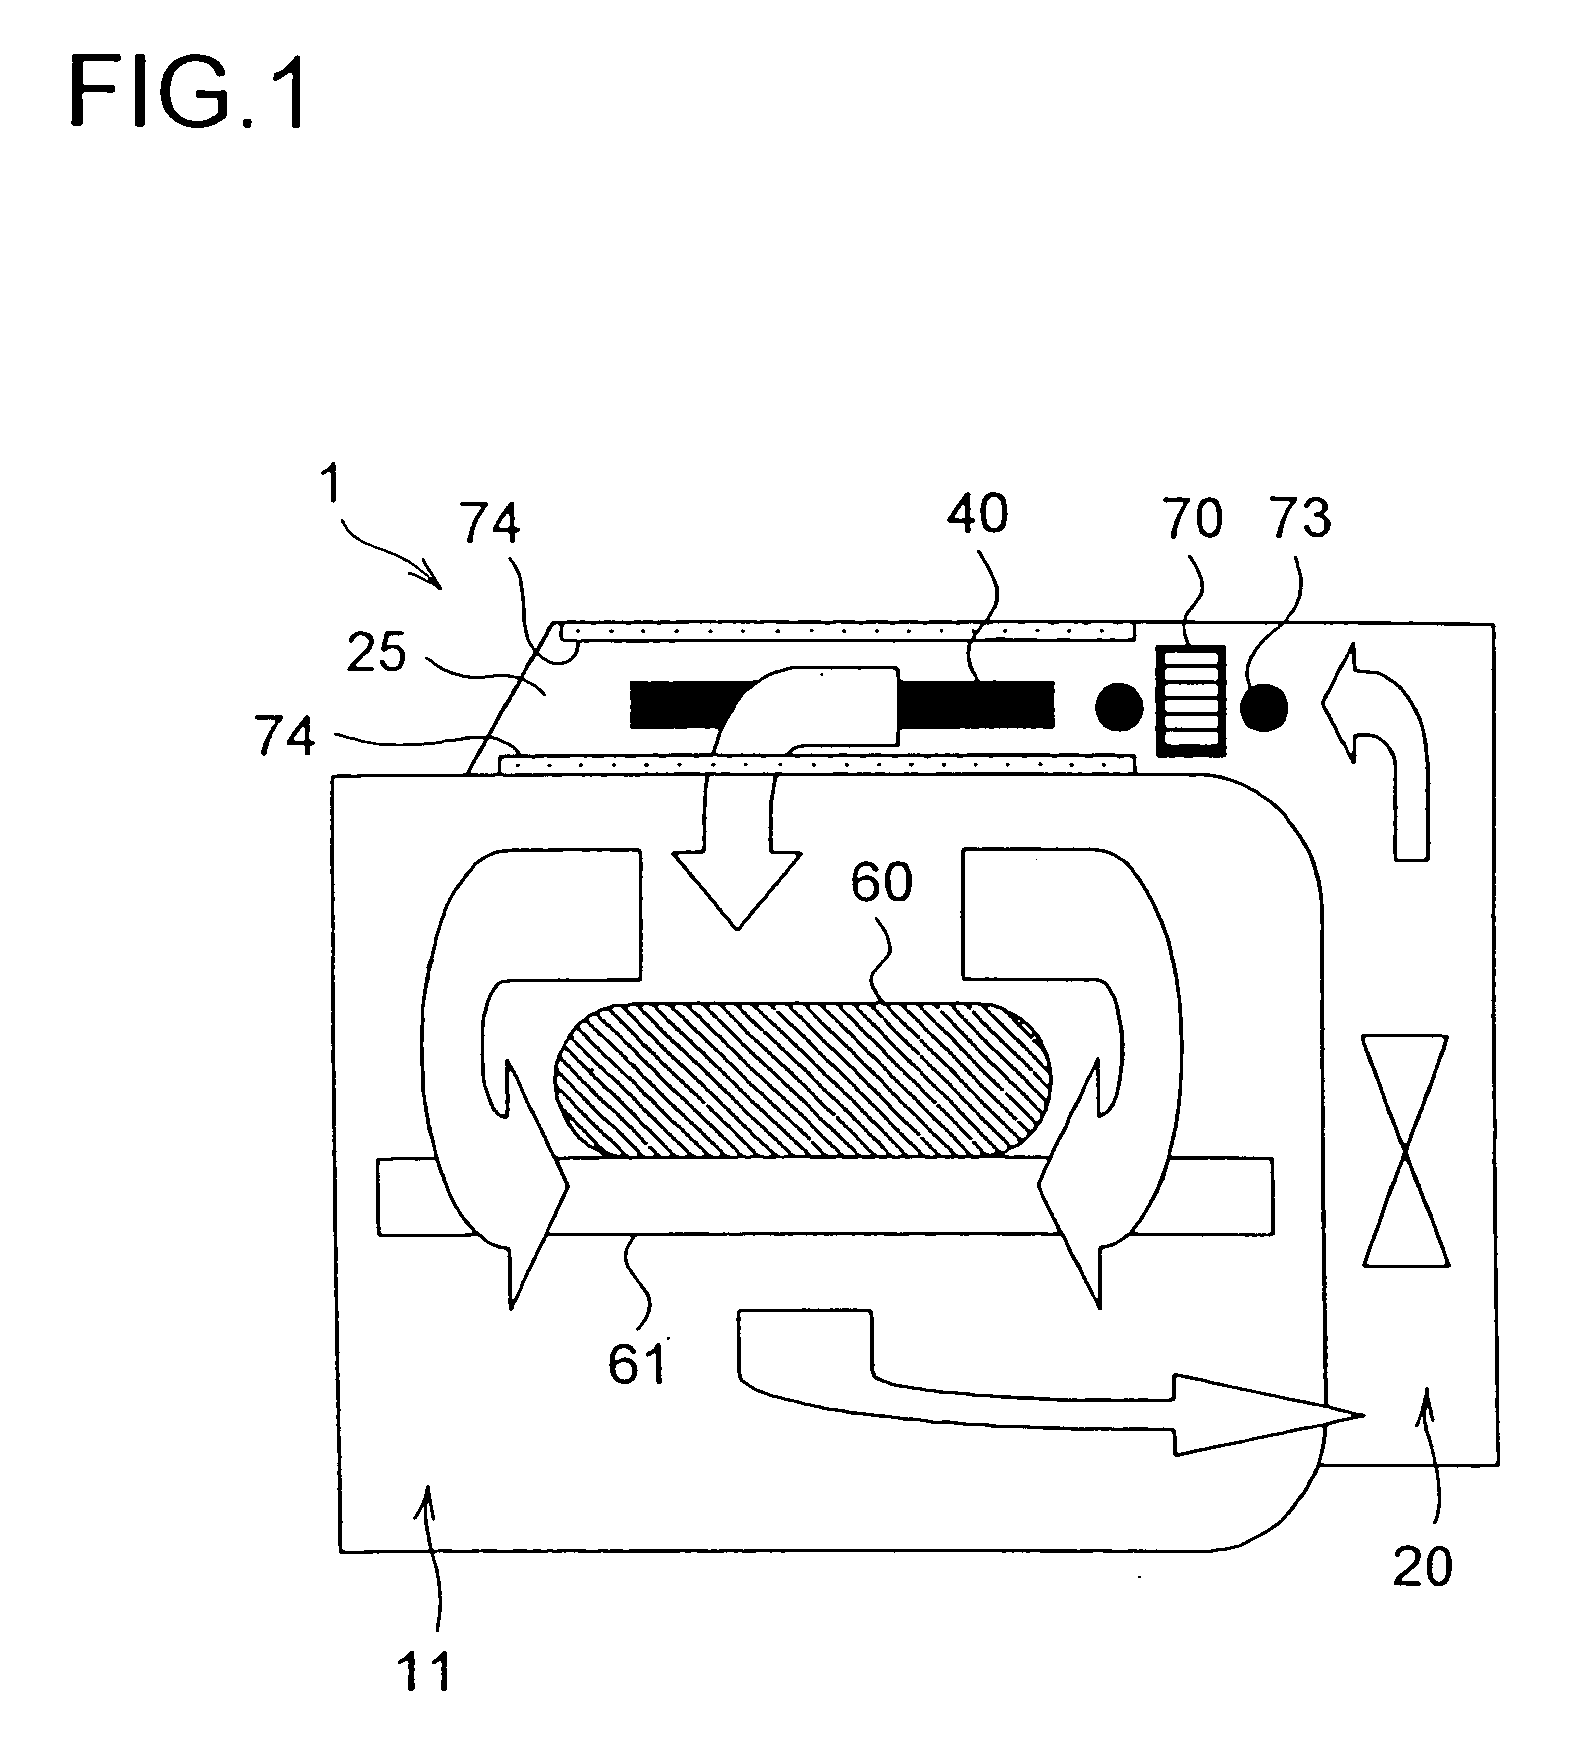 Heating cooking device